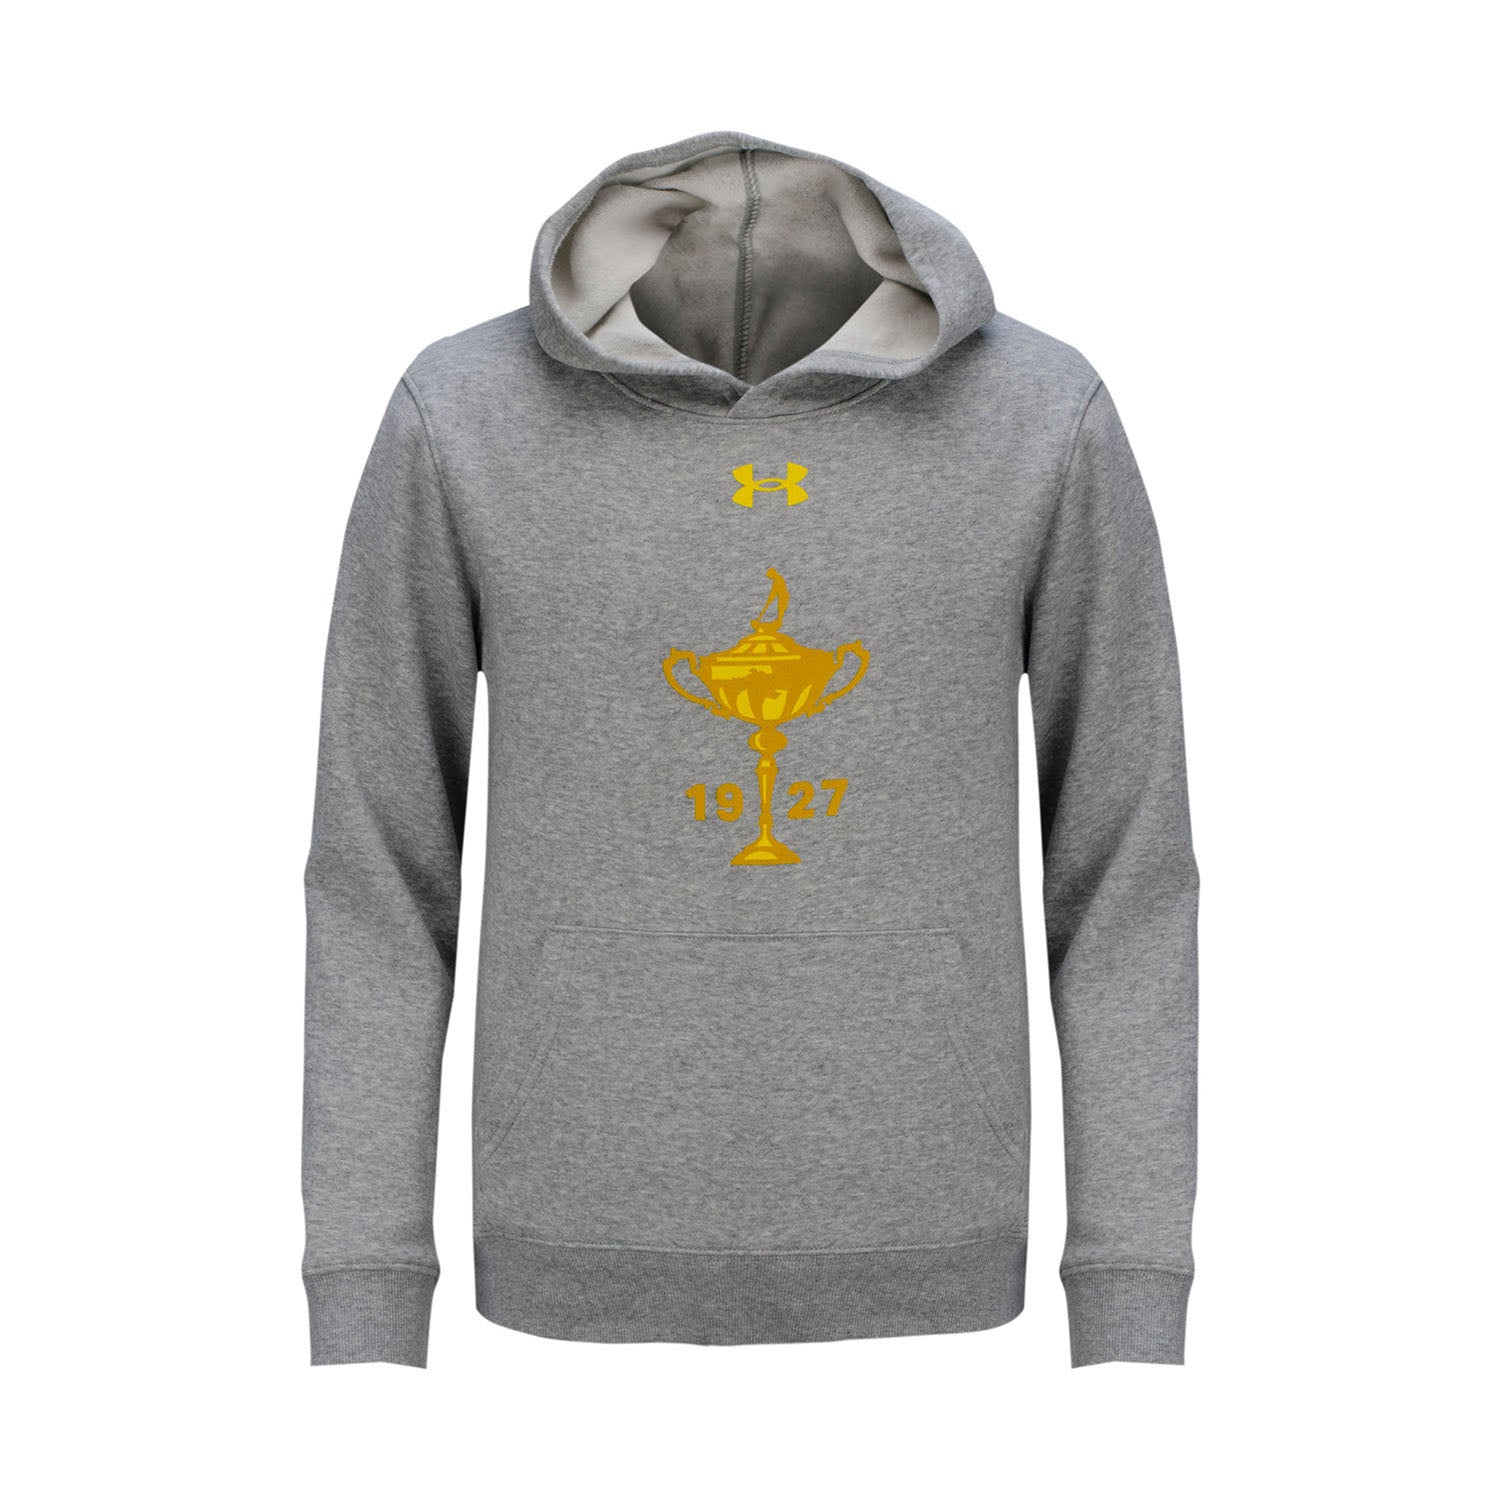 Boys Youth All Day Fleece Hoodie - Grey- Front View